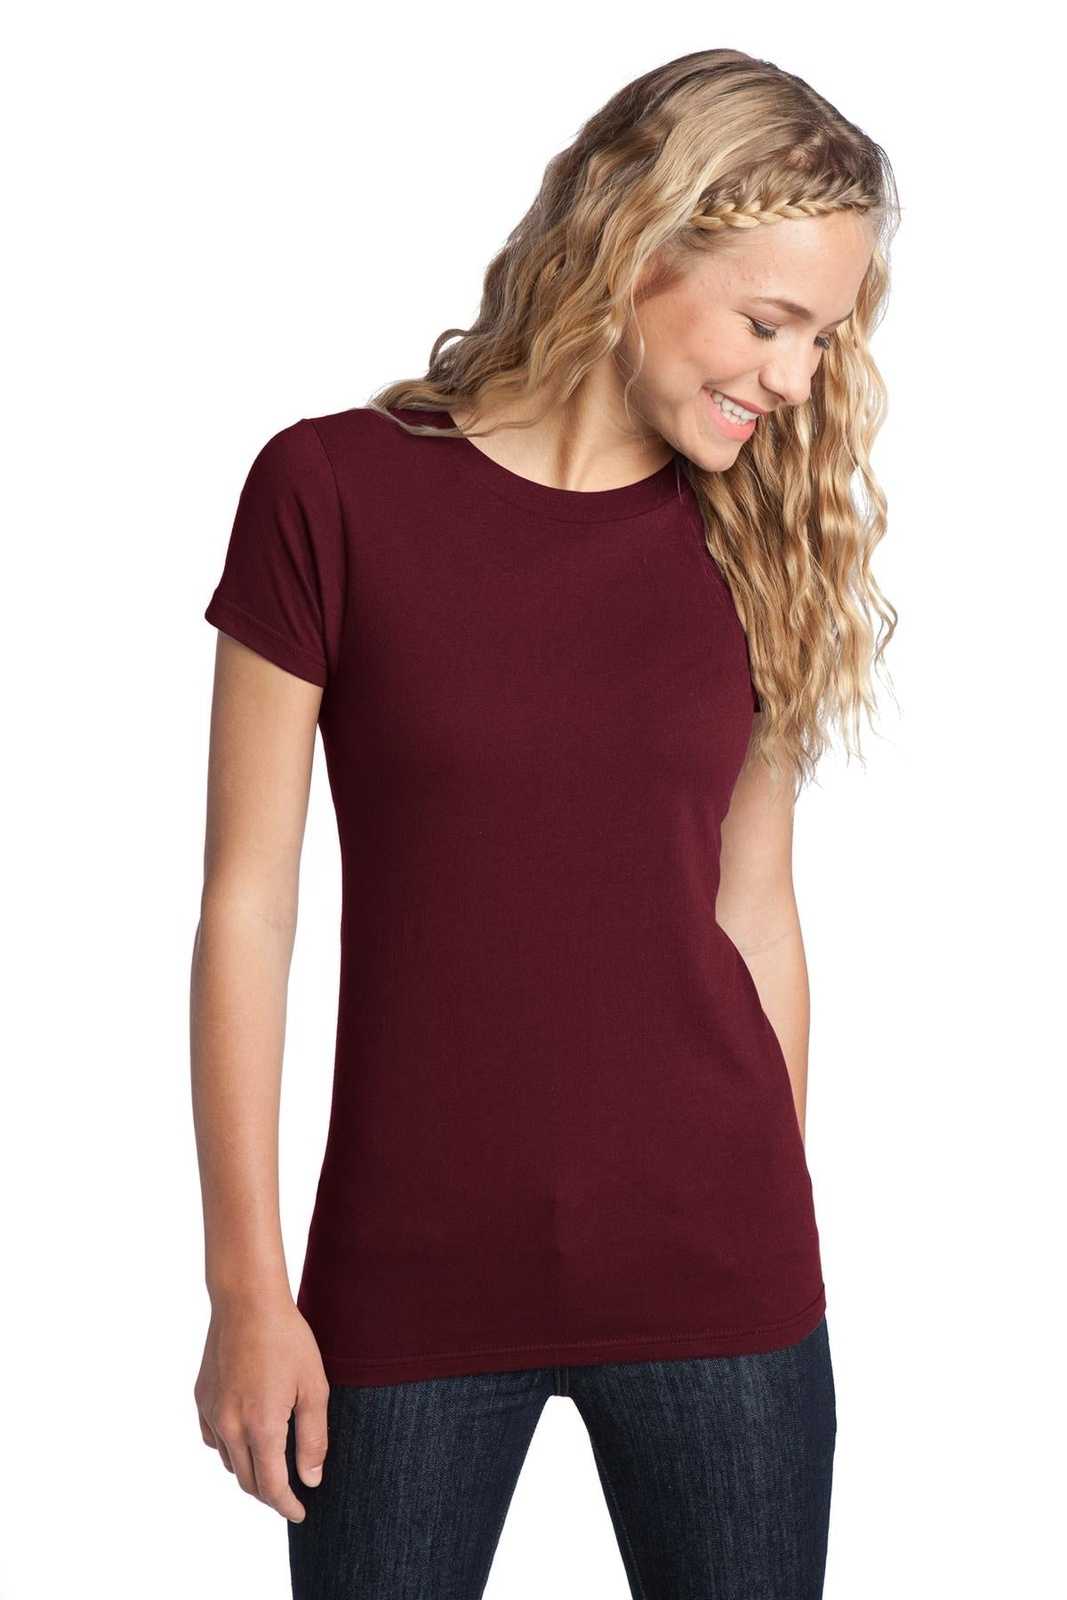 District DT5001 Women's Fitted The Concert Tee - Maroon - HIT a Double - 1